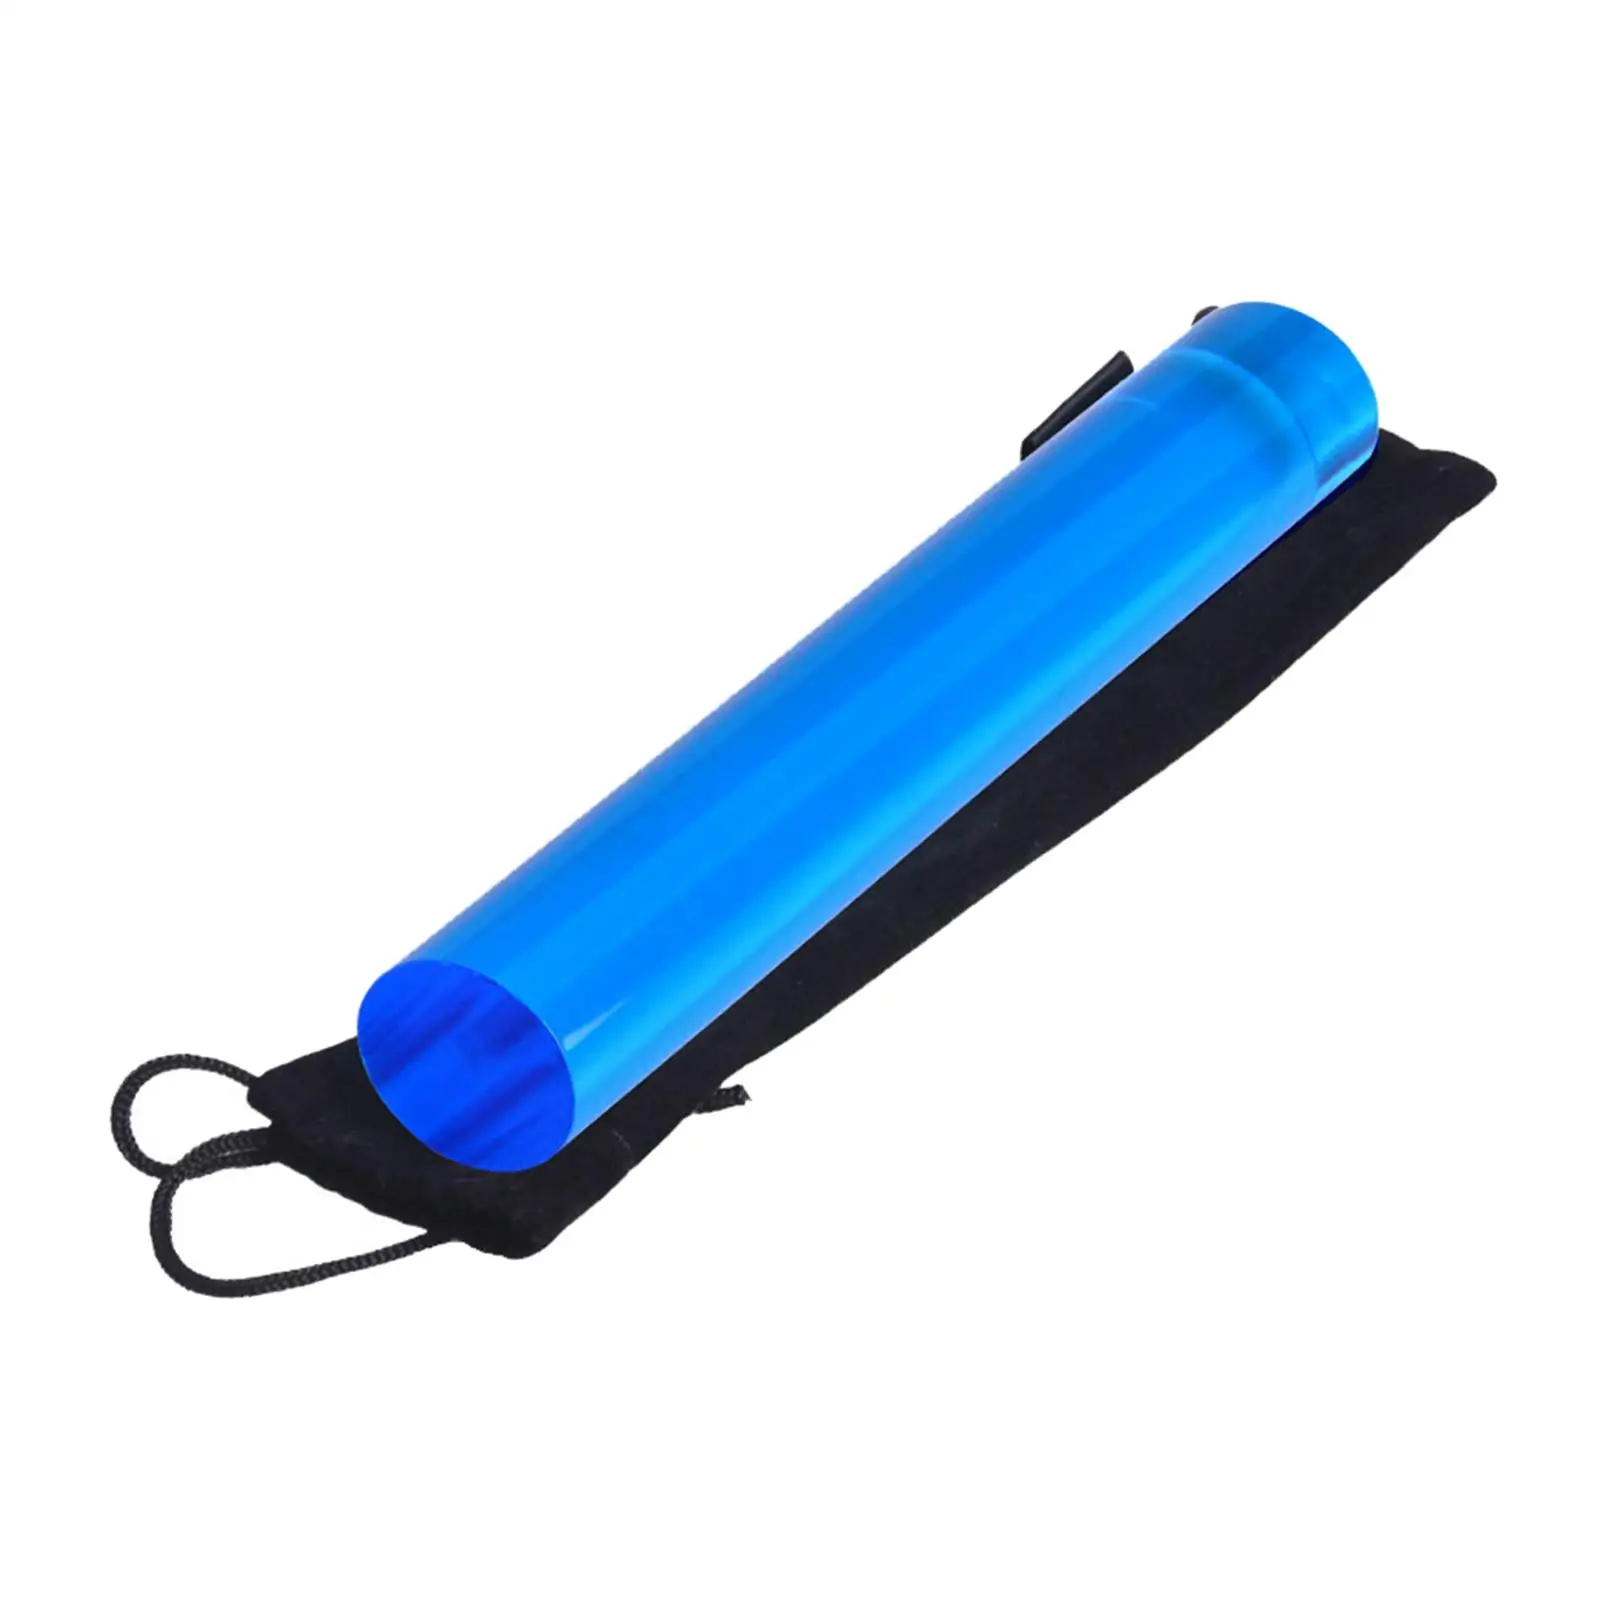 Ping Pong Rubber Roller Trainer Multifunctional Table Tennis Sticky Tool